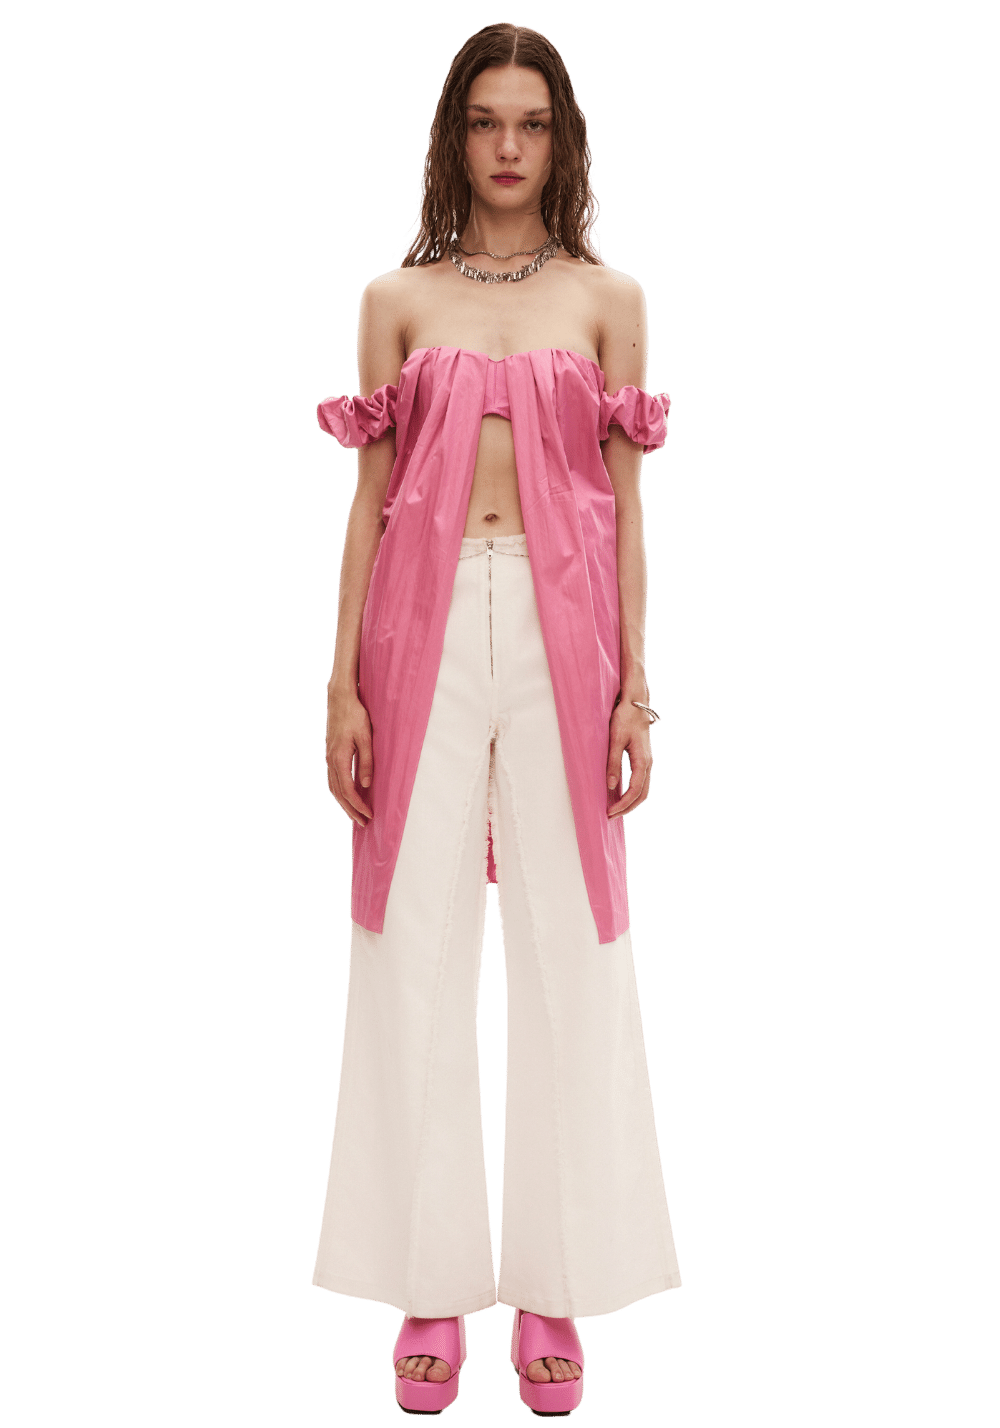 Strapless Ruffled Bubble Sleeve Top - PSYLOS 1, Strapless Ruffled Bubble Sleeve Top, T-Shirt, LEEWEI, PSYLOS 1